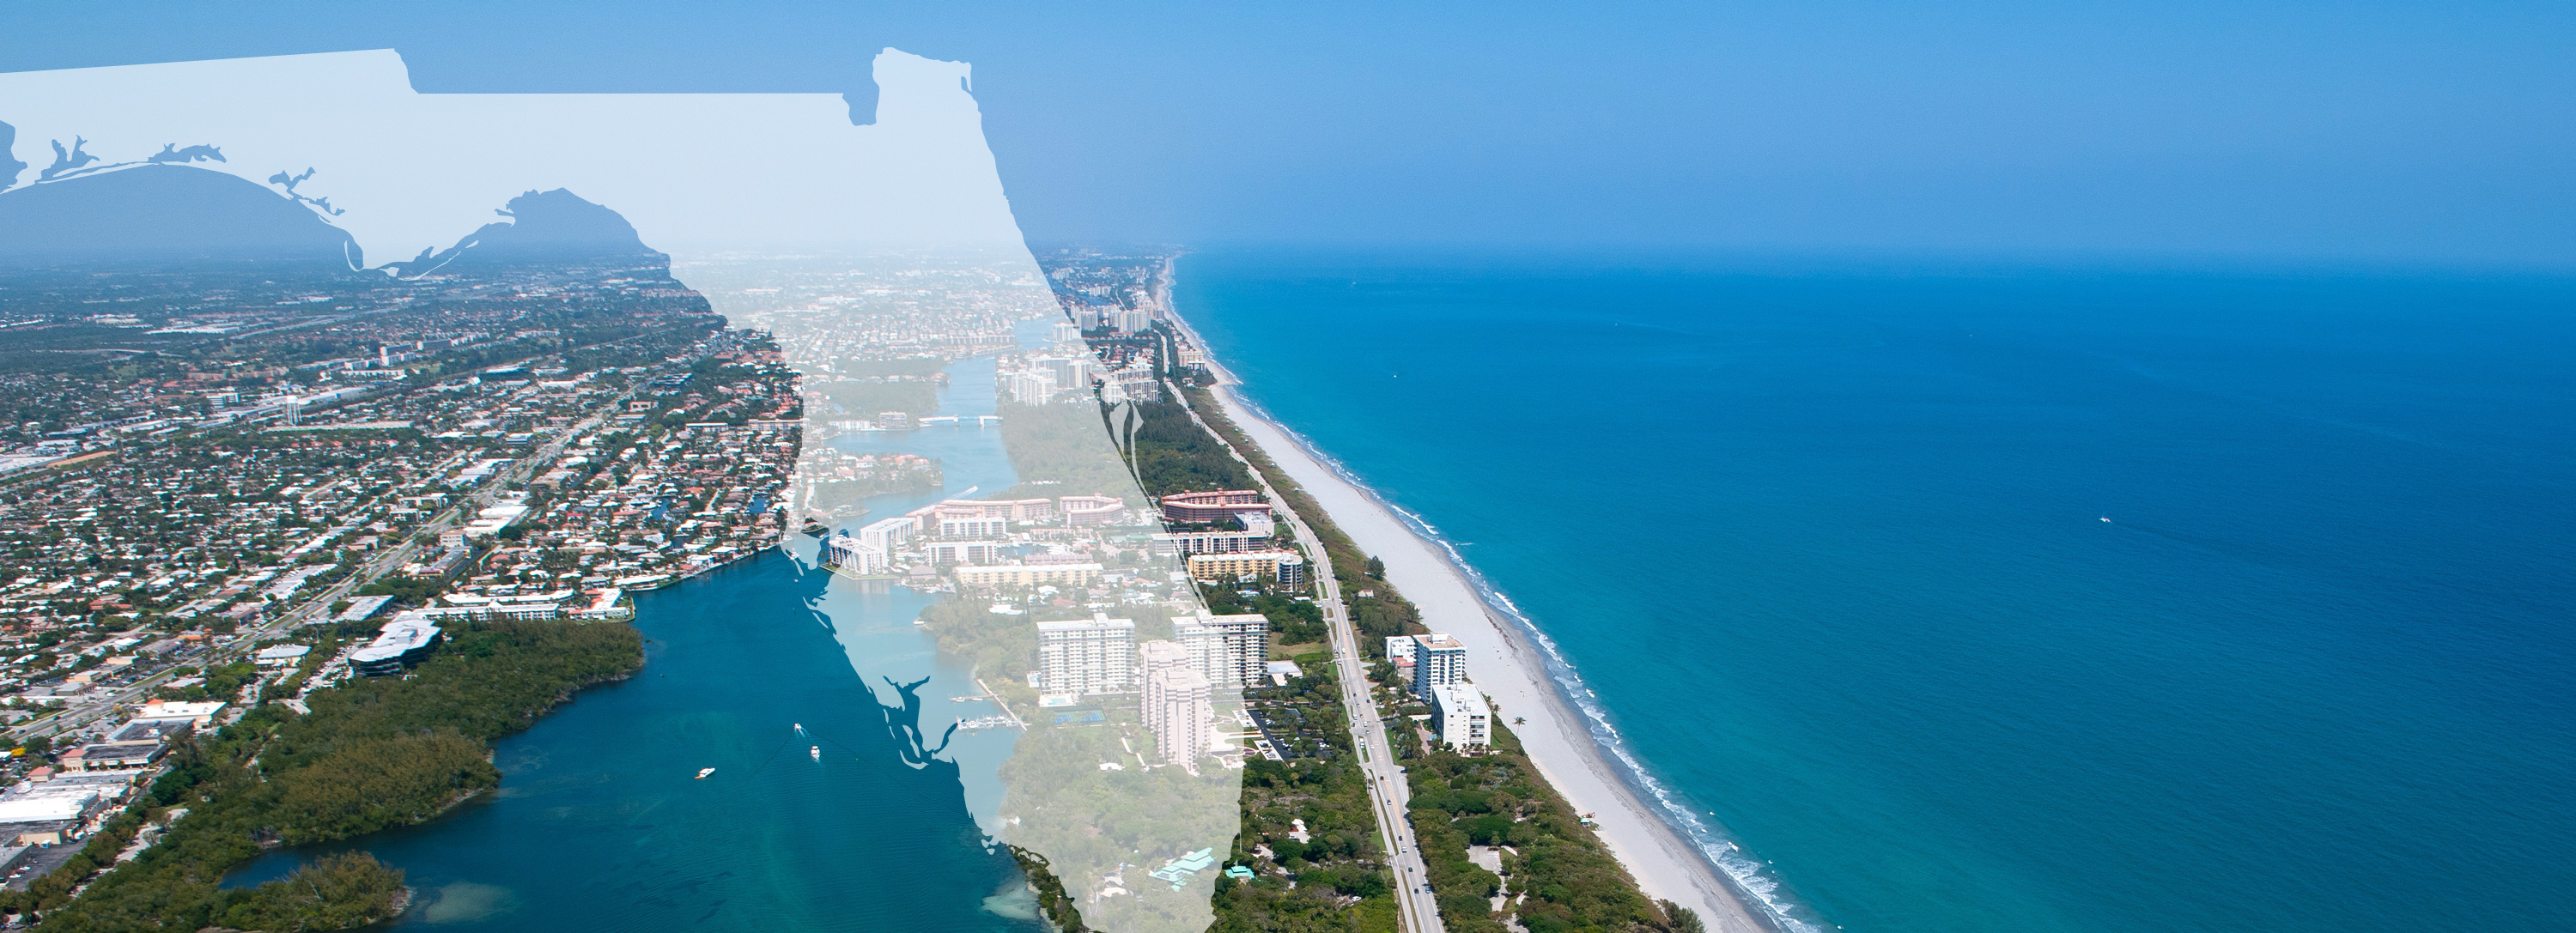 Aerial view of east Boca Raton with an overlay of the Florida Peninsula